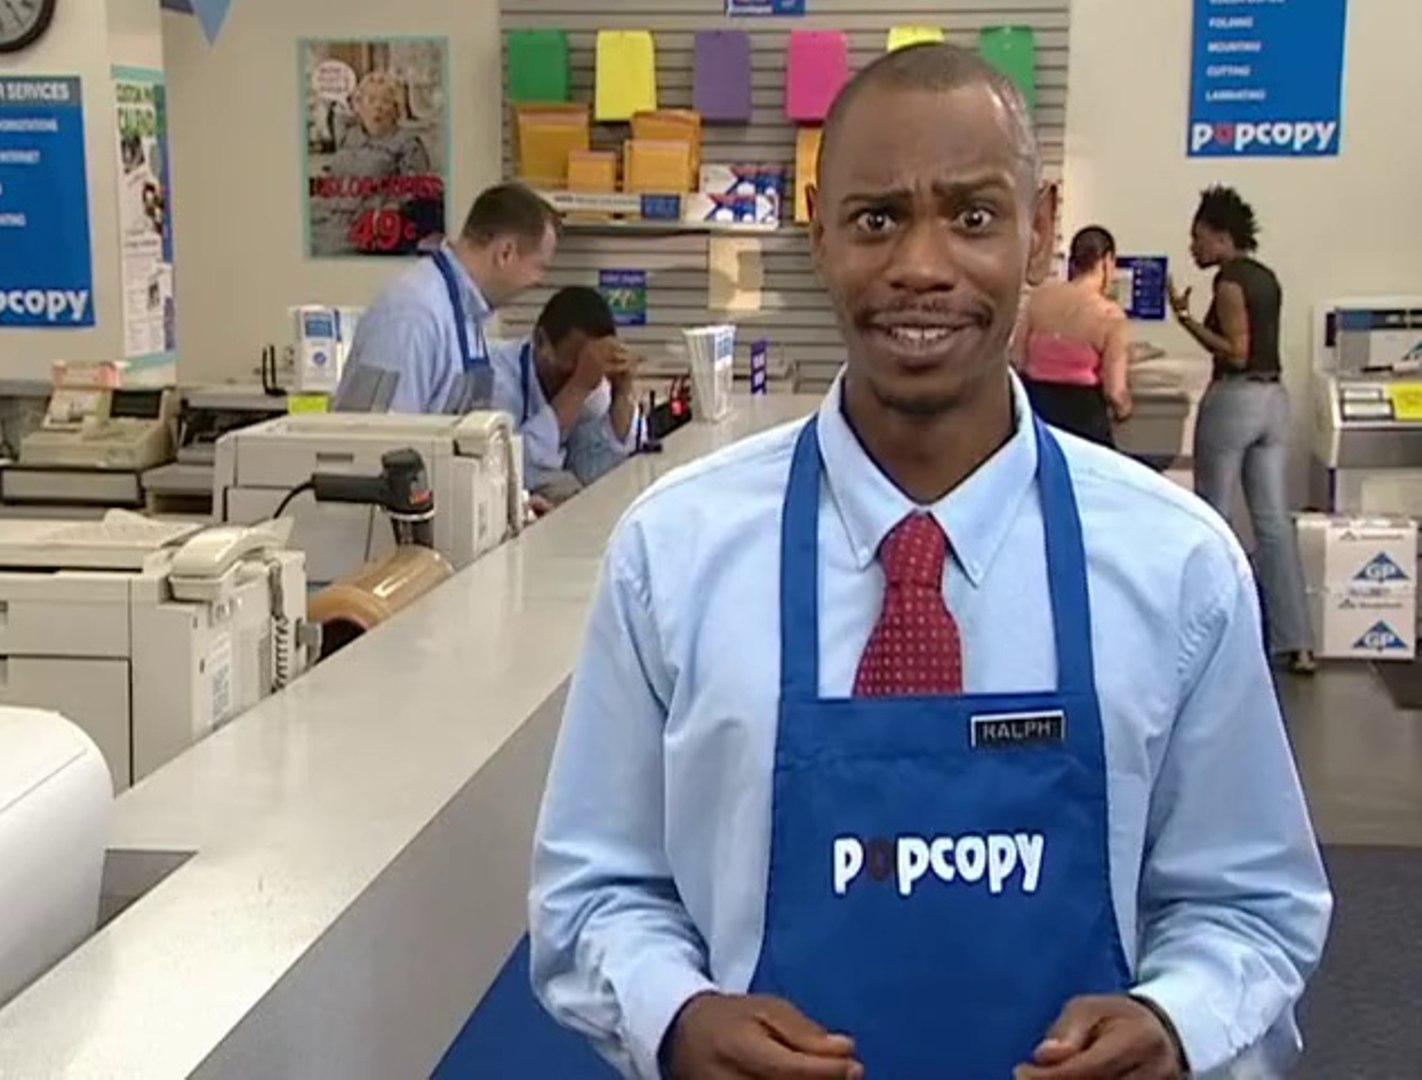 High Quality Dave Chappele’s Show Popcopy Blank Meme Template